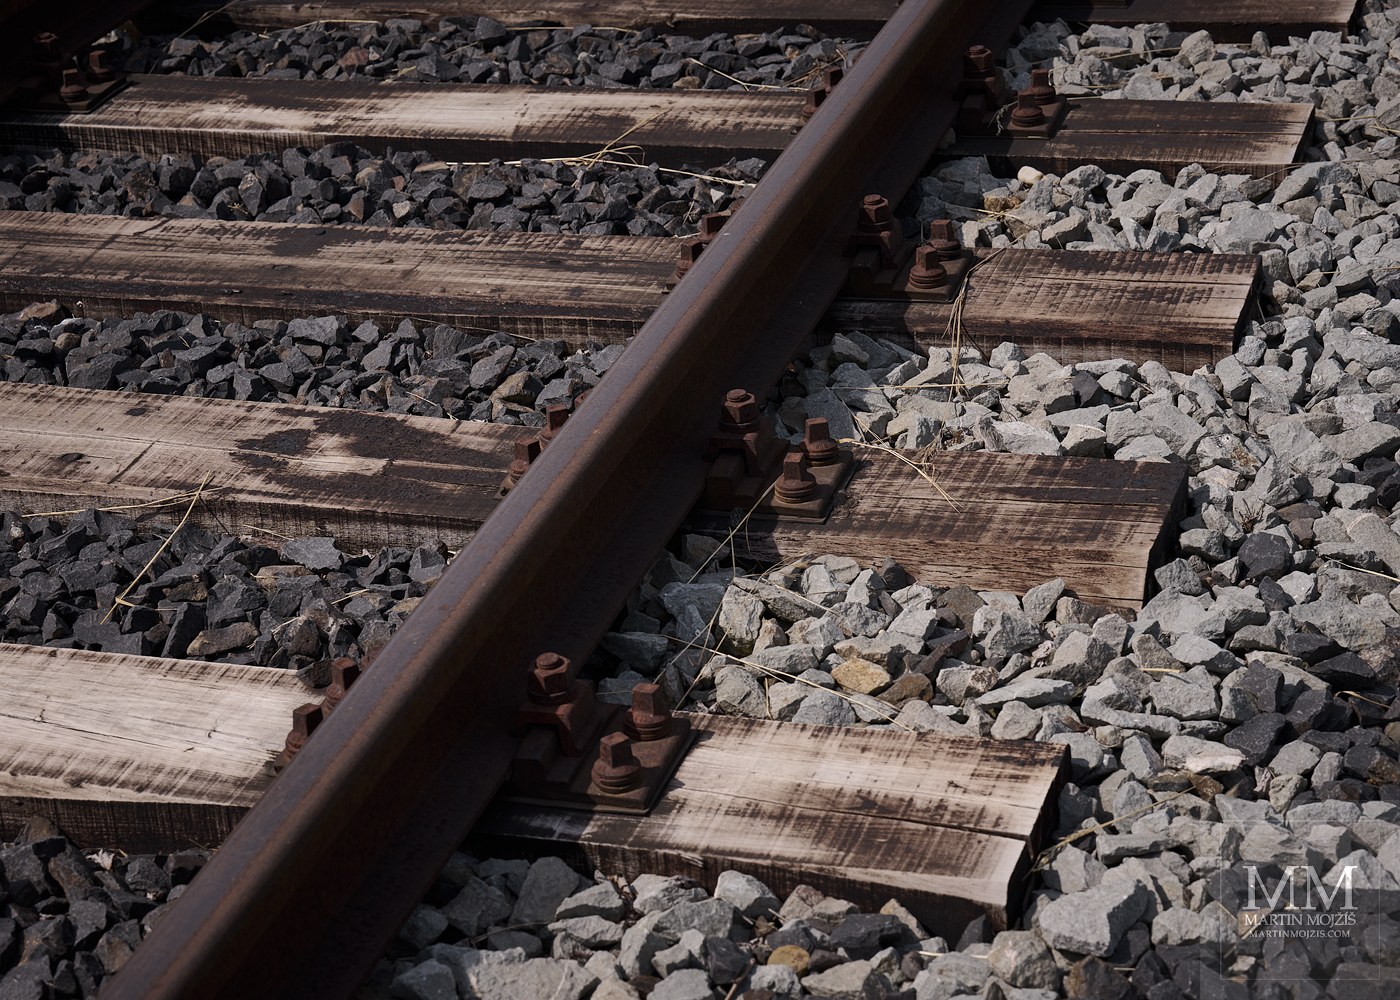 Railroad tracks, wooden frets and gravel bed. Fine art photograph WOOD, METAL AND STONE, photographed by Martin Mojzis.